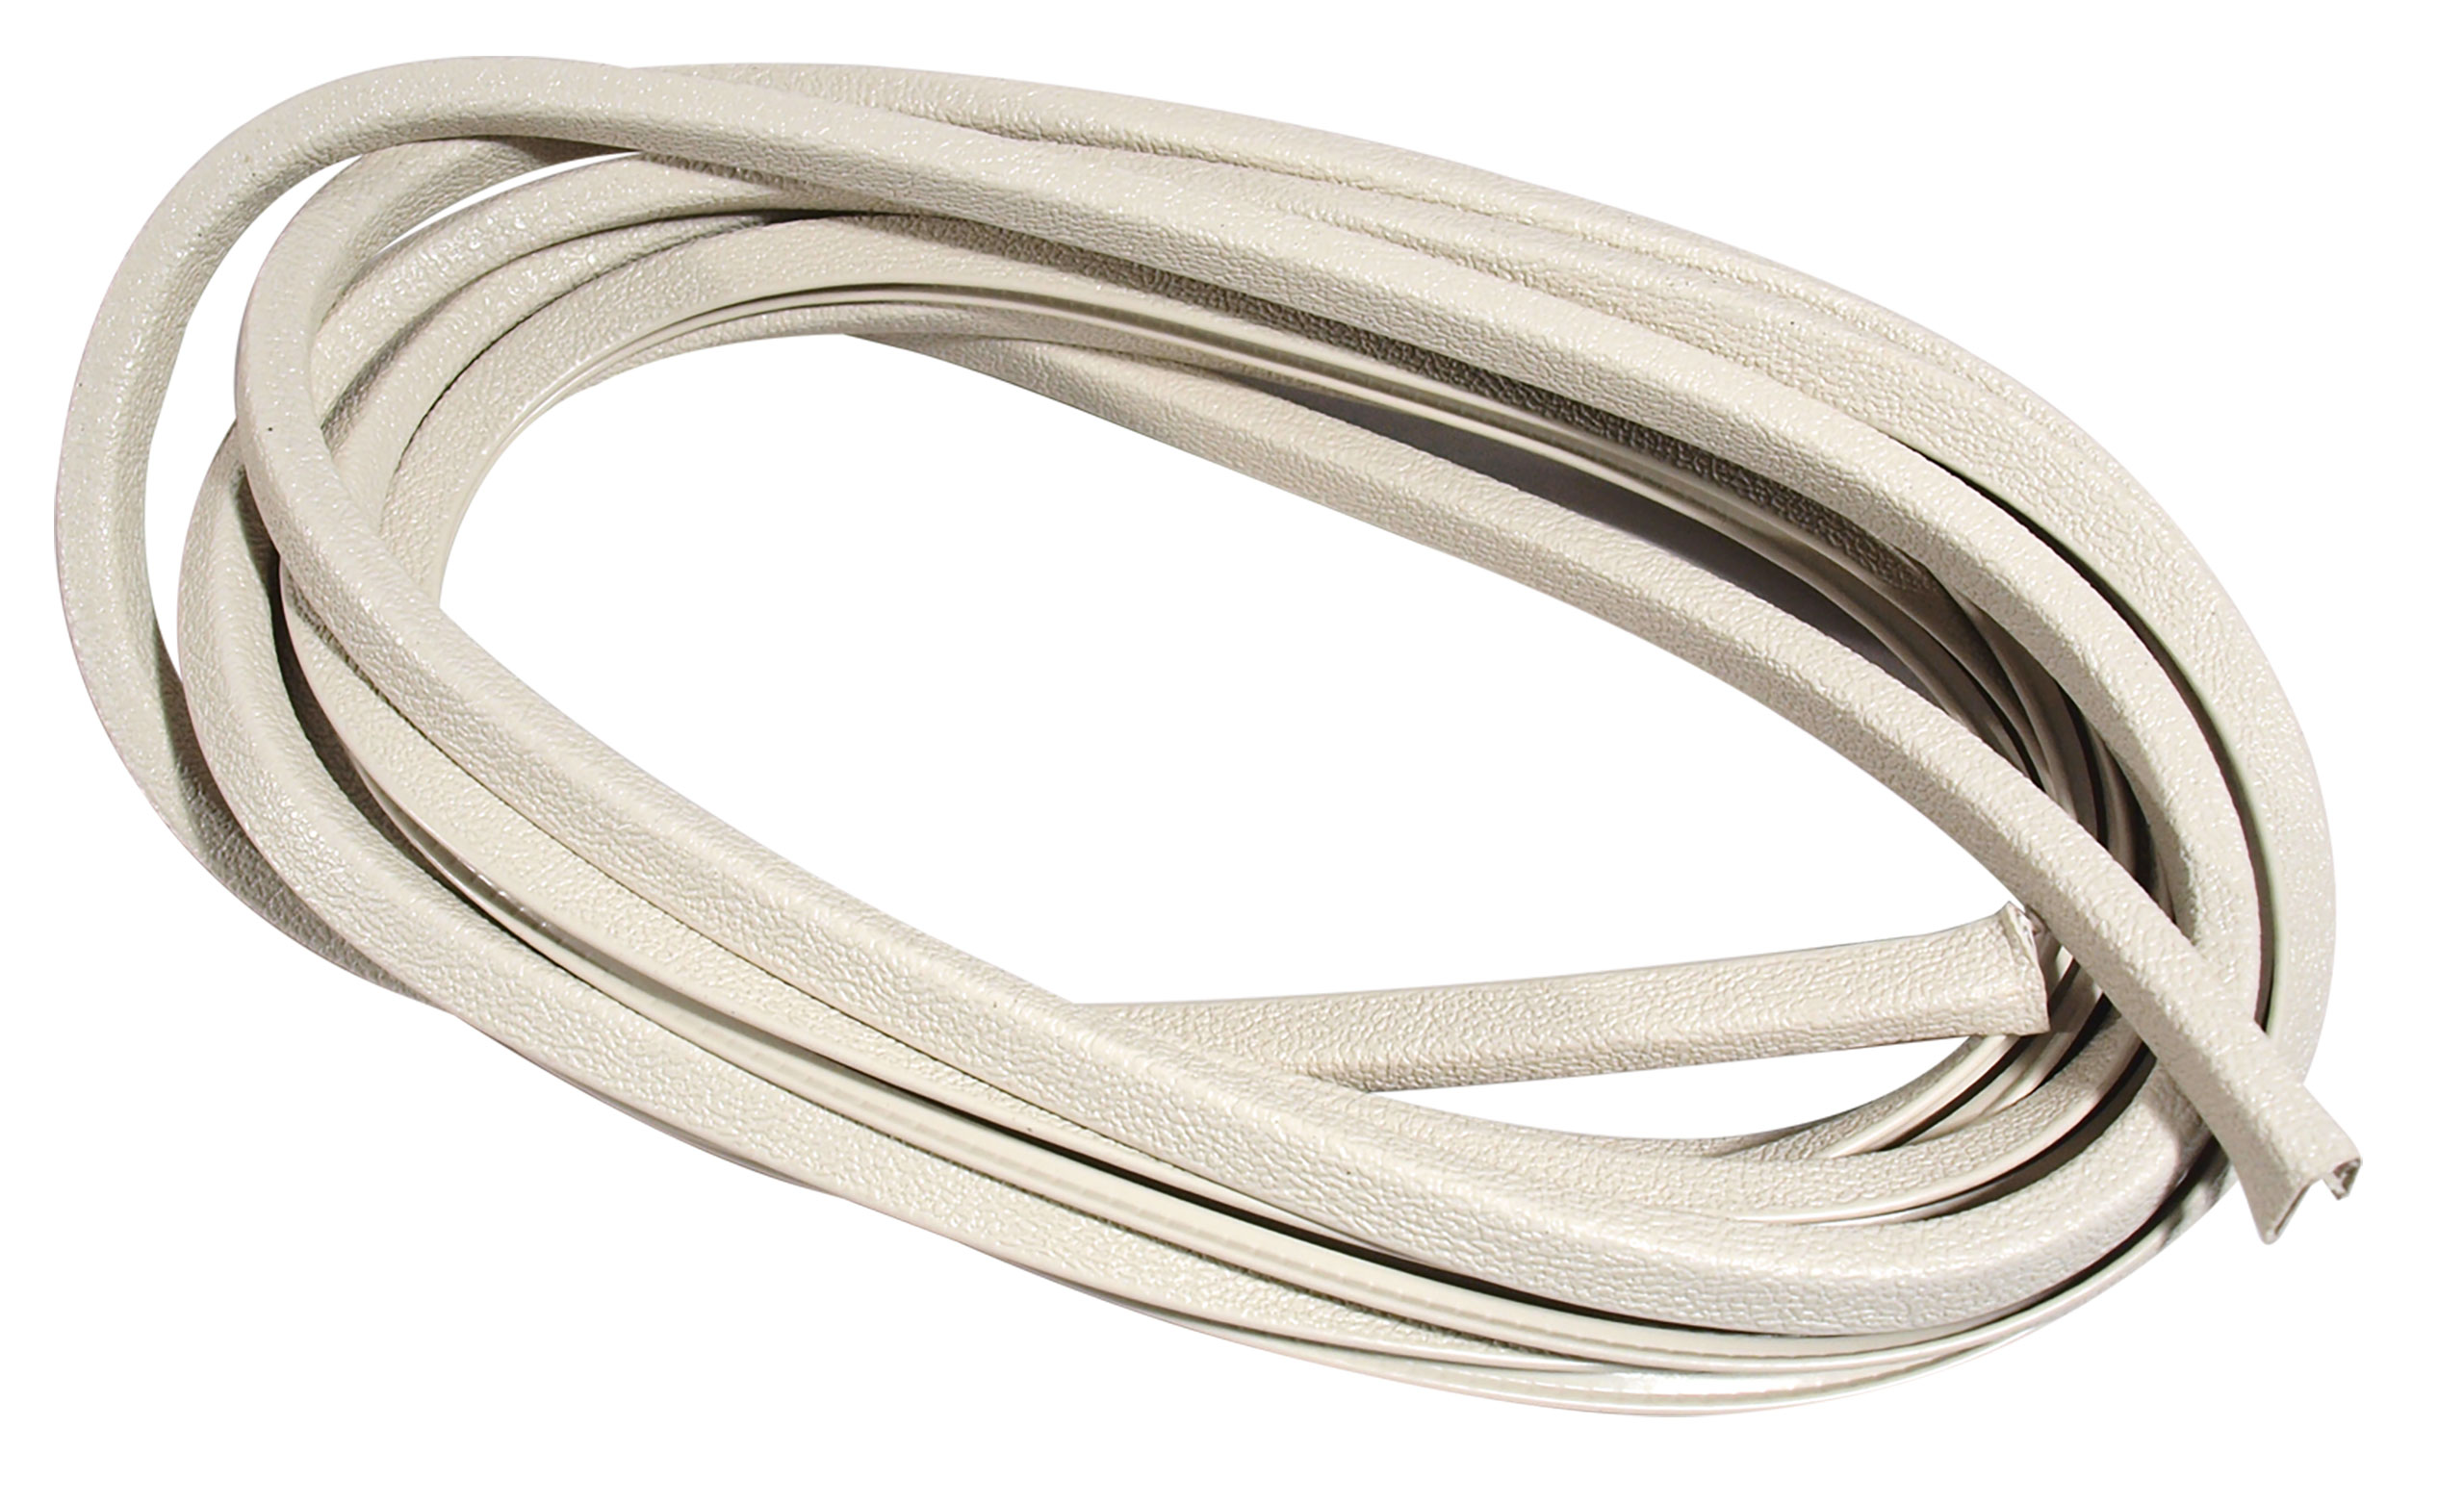 TMI Products 1964-1968 Ford Mustang Pinch-On Vinyl Windlace Trim - 20 foot - White